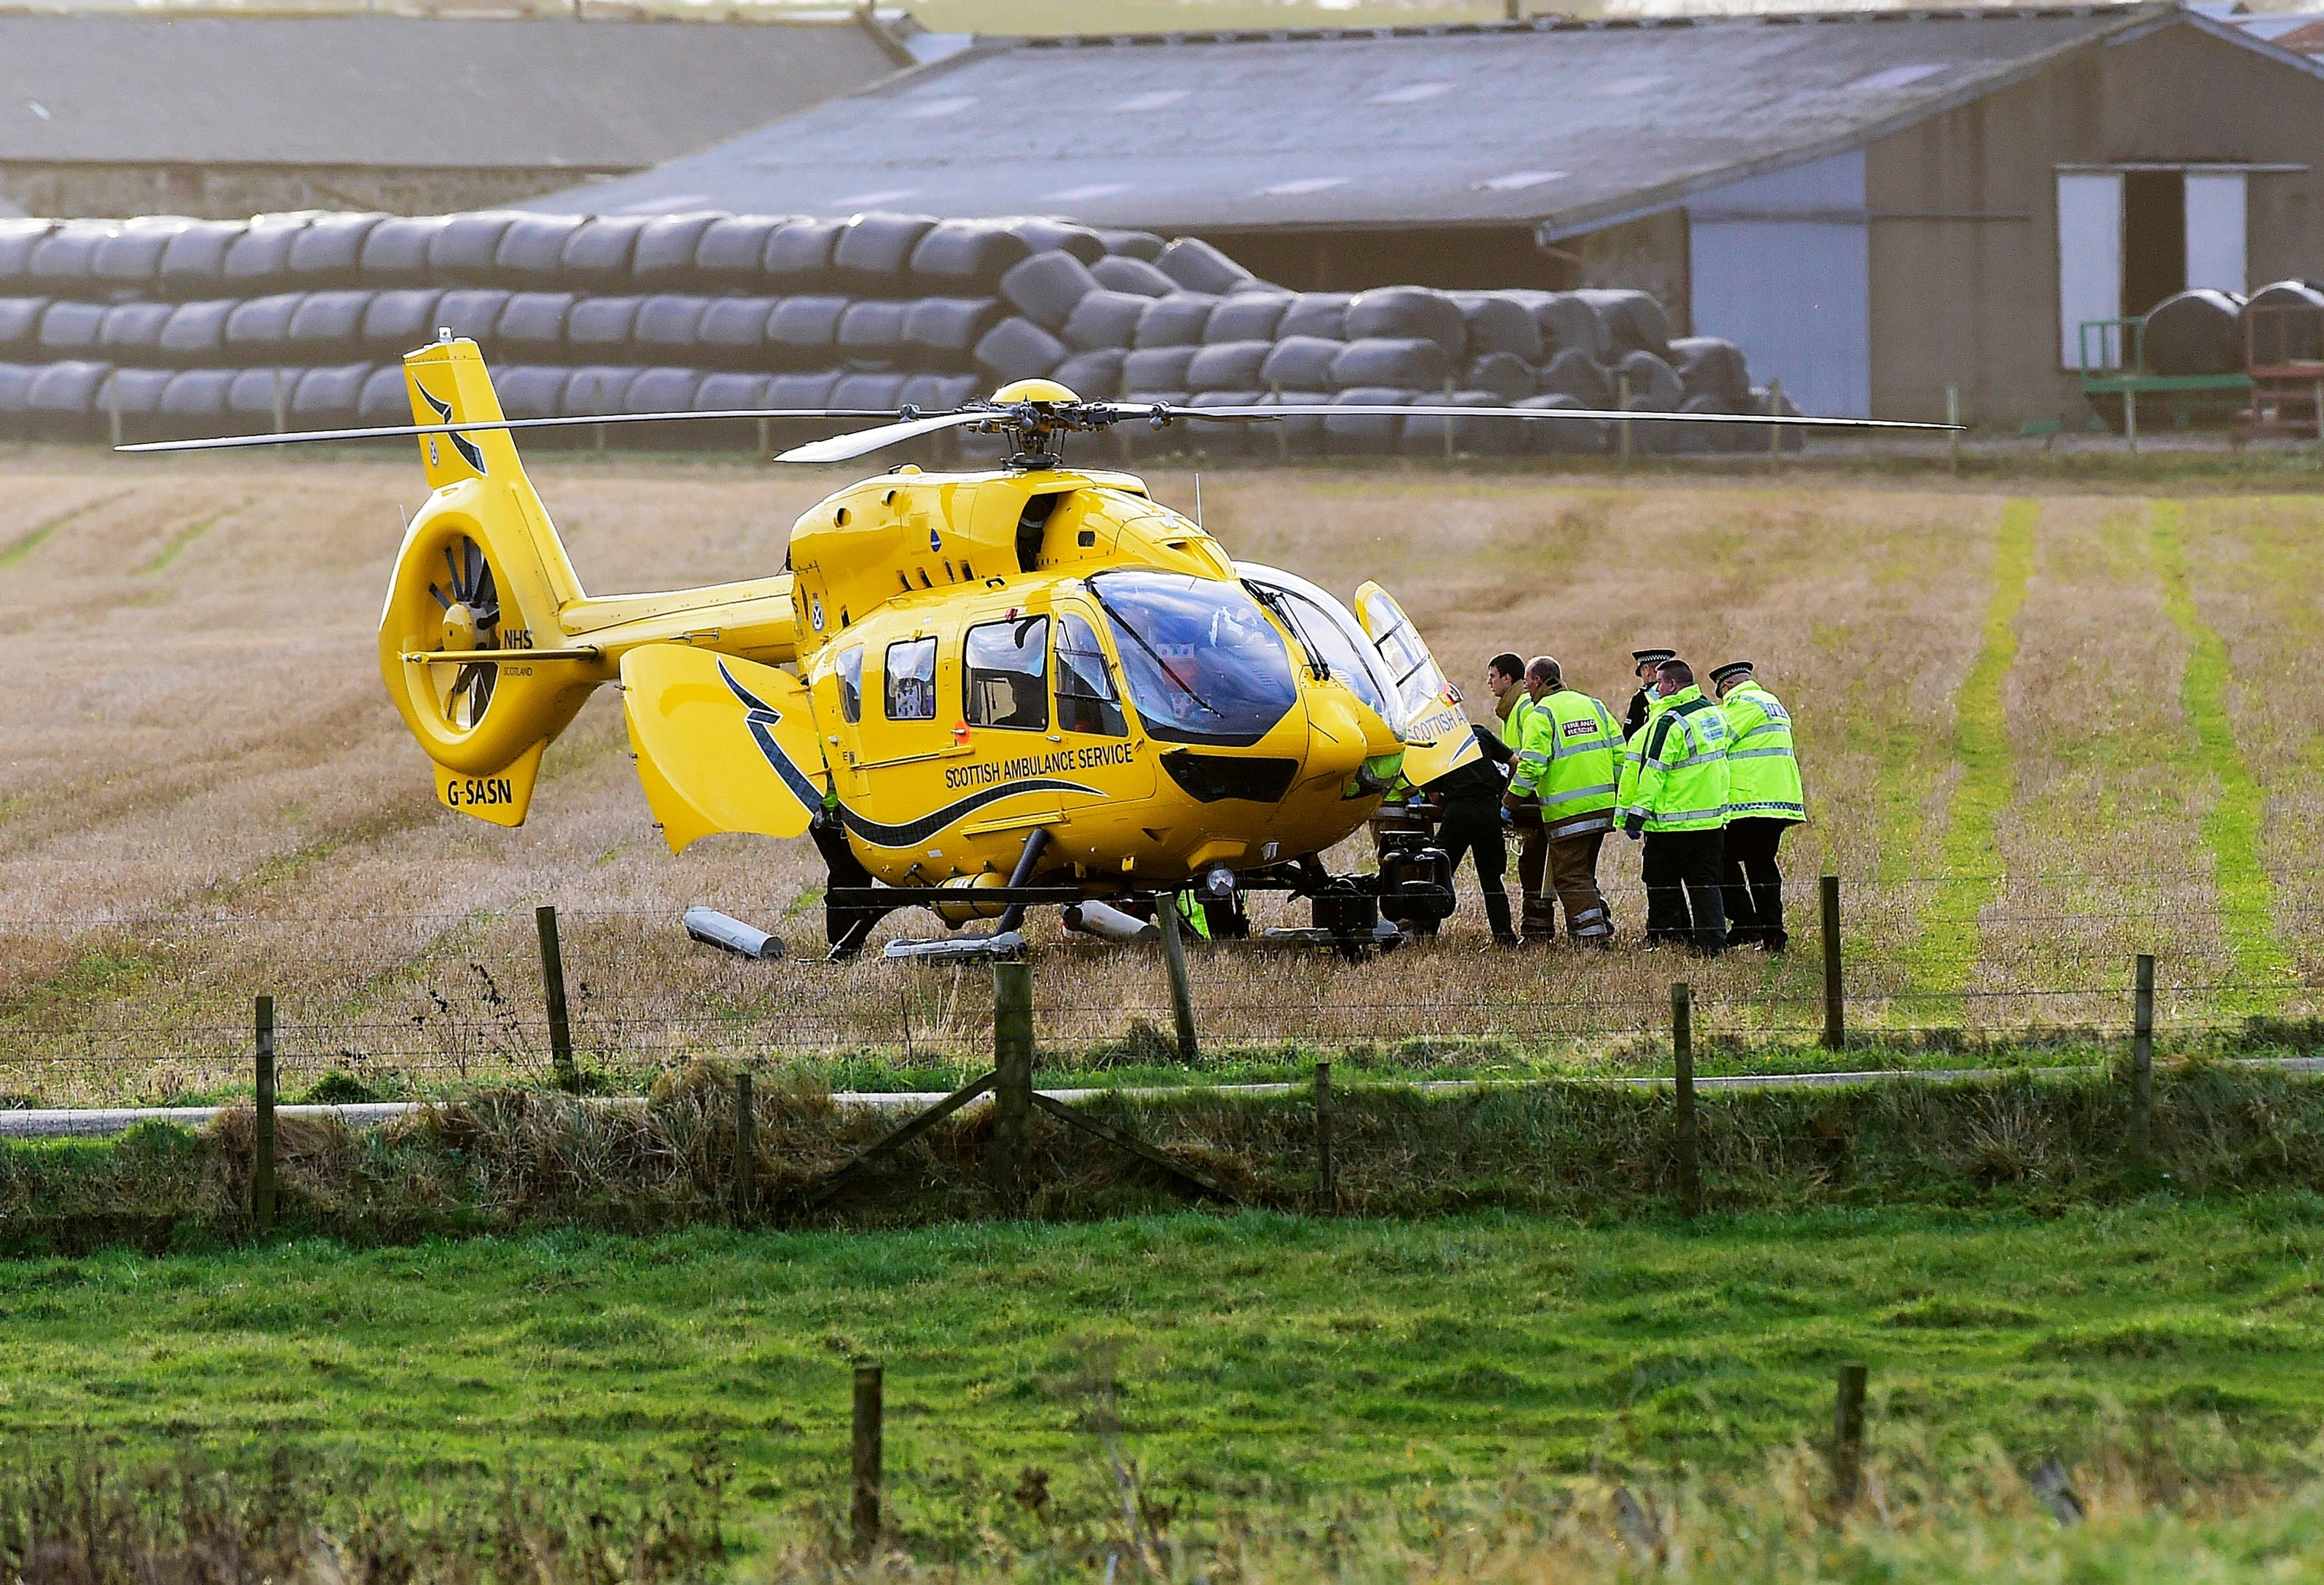 Air ambulance arrives to take one of the casualties to Aberdeen